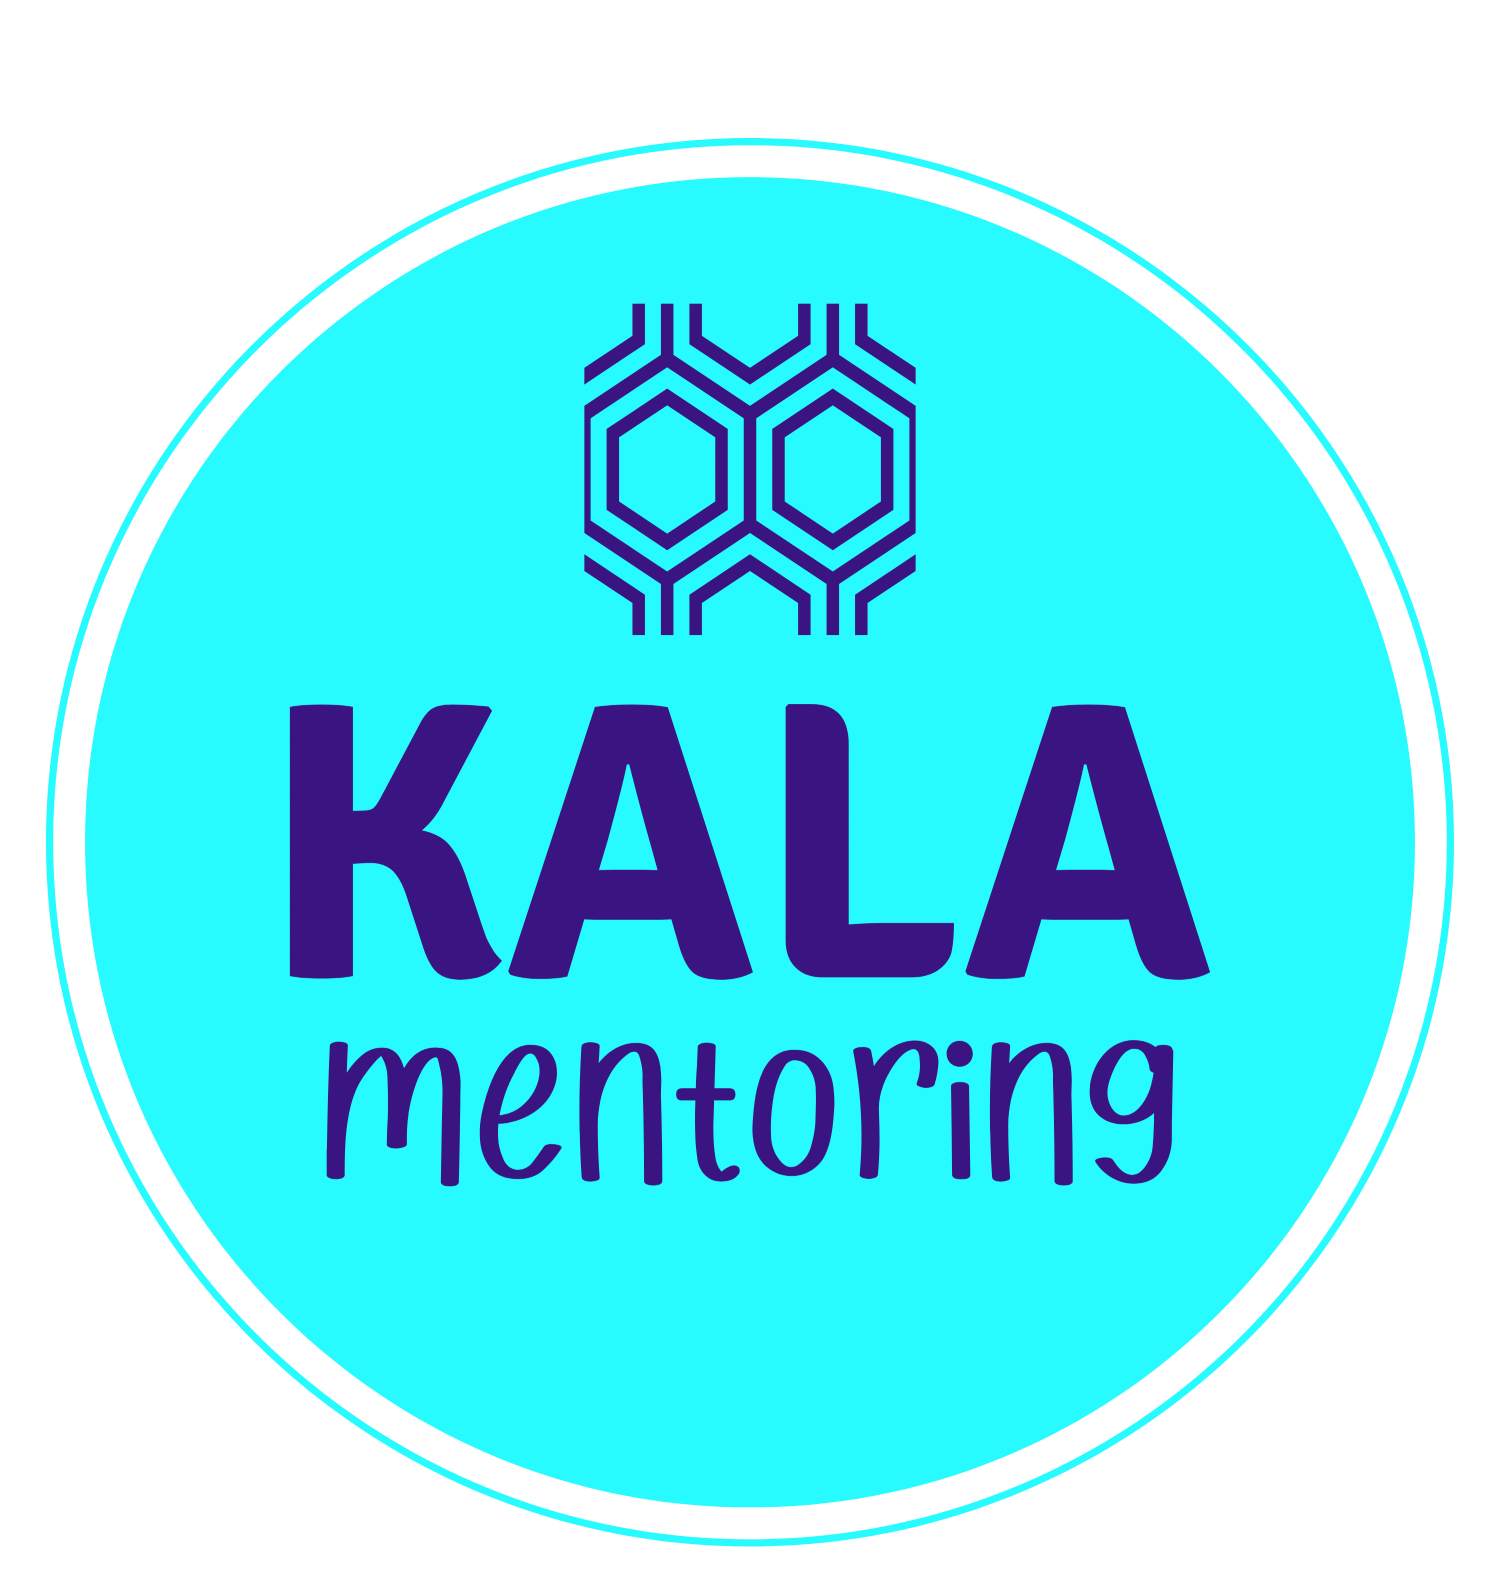 KALA Mentoring Launches Groundbreaking Career Development Programs Rooted in Human Connection